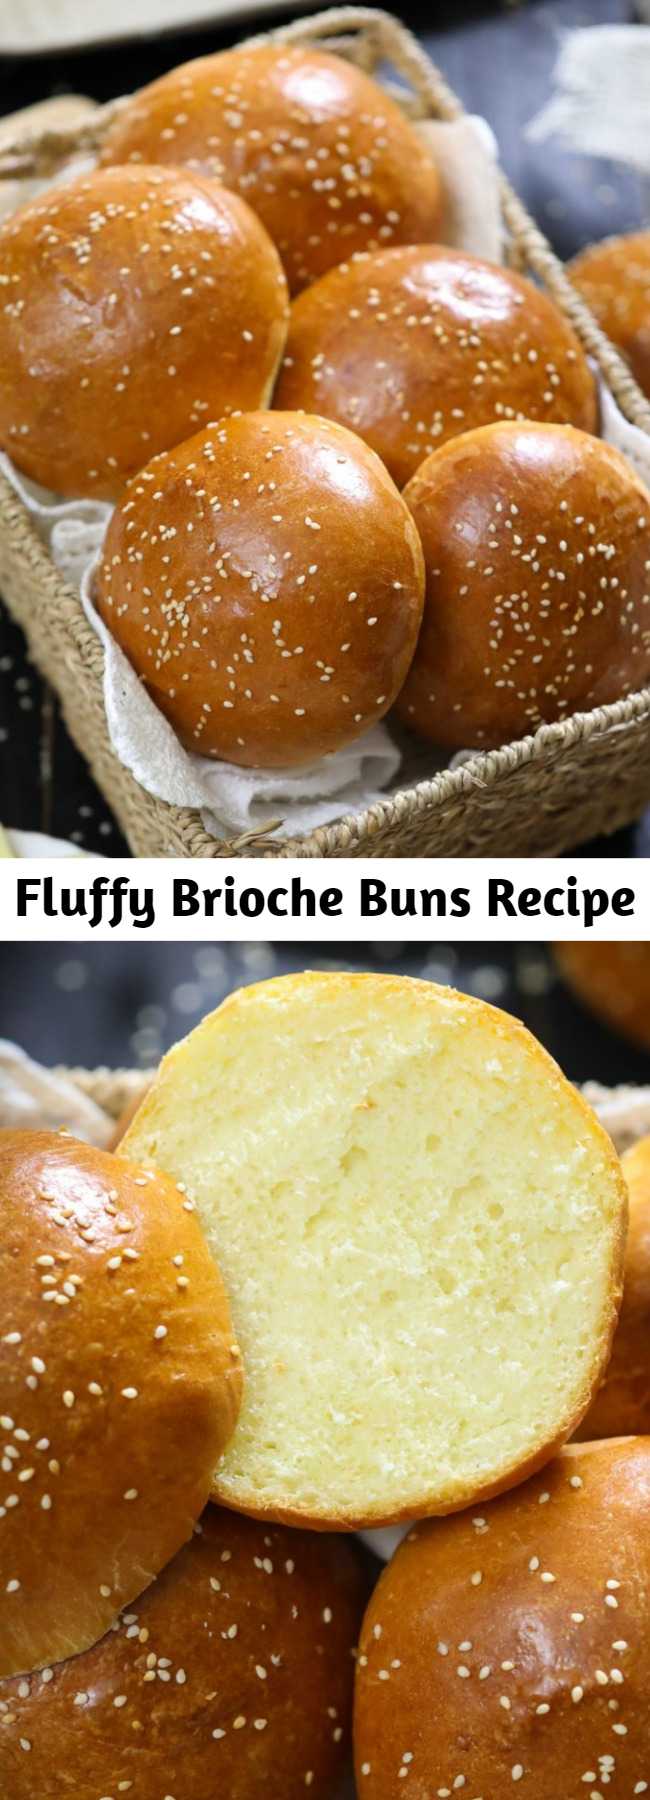 Fluffy Brioche Buns Recipe - These buttery brioche buns are so fluffy and perfect for any burger or sandwich. The moment you sink your teeth into the brioche rolls you'll fall in love! #briochebuns #brioche #briocherecipe #burgerbuns #briocherolls